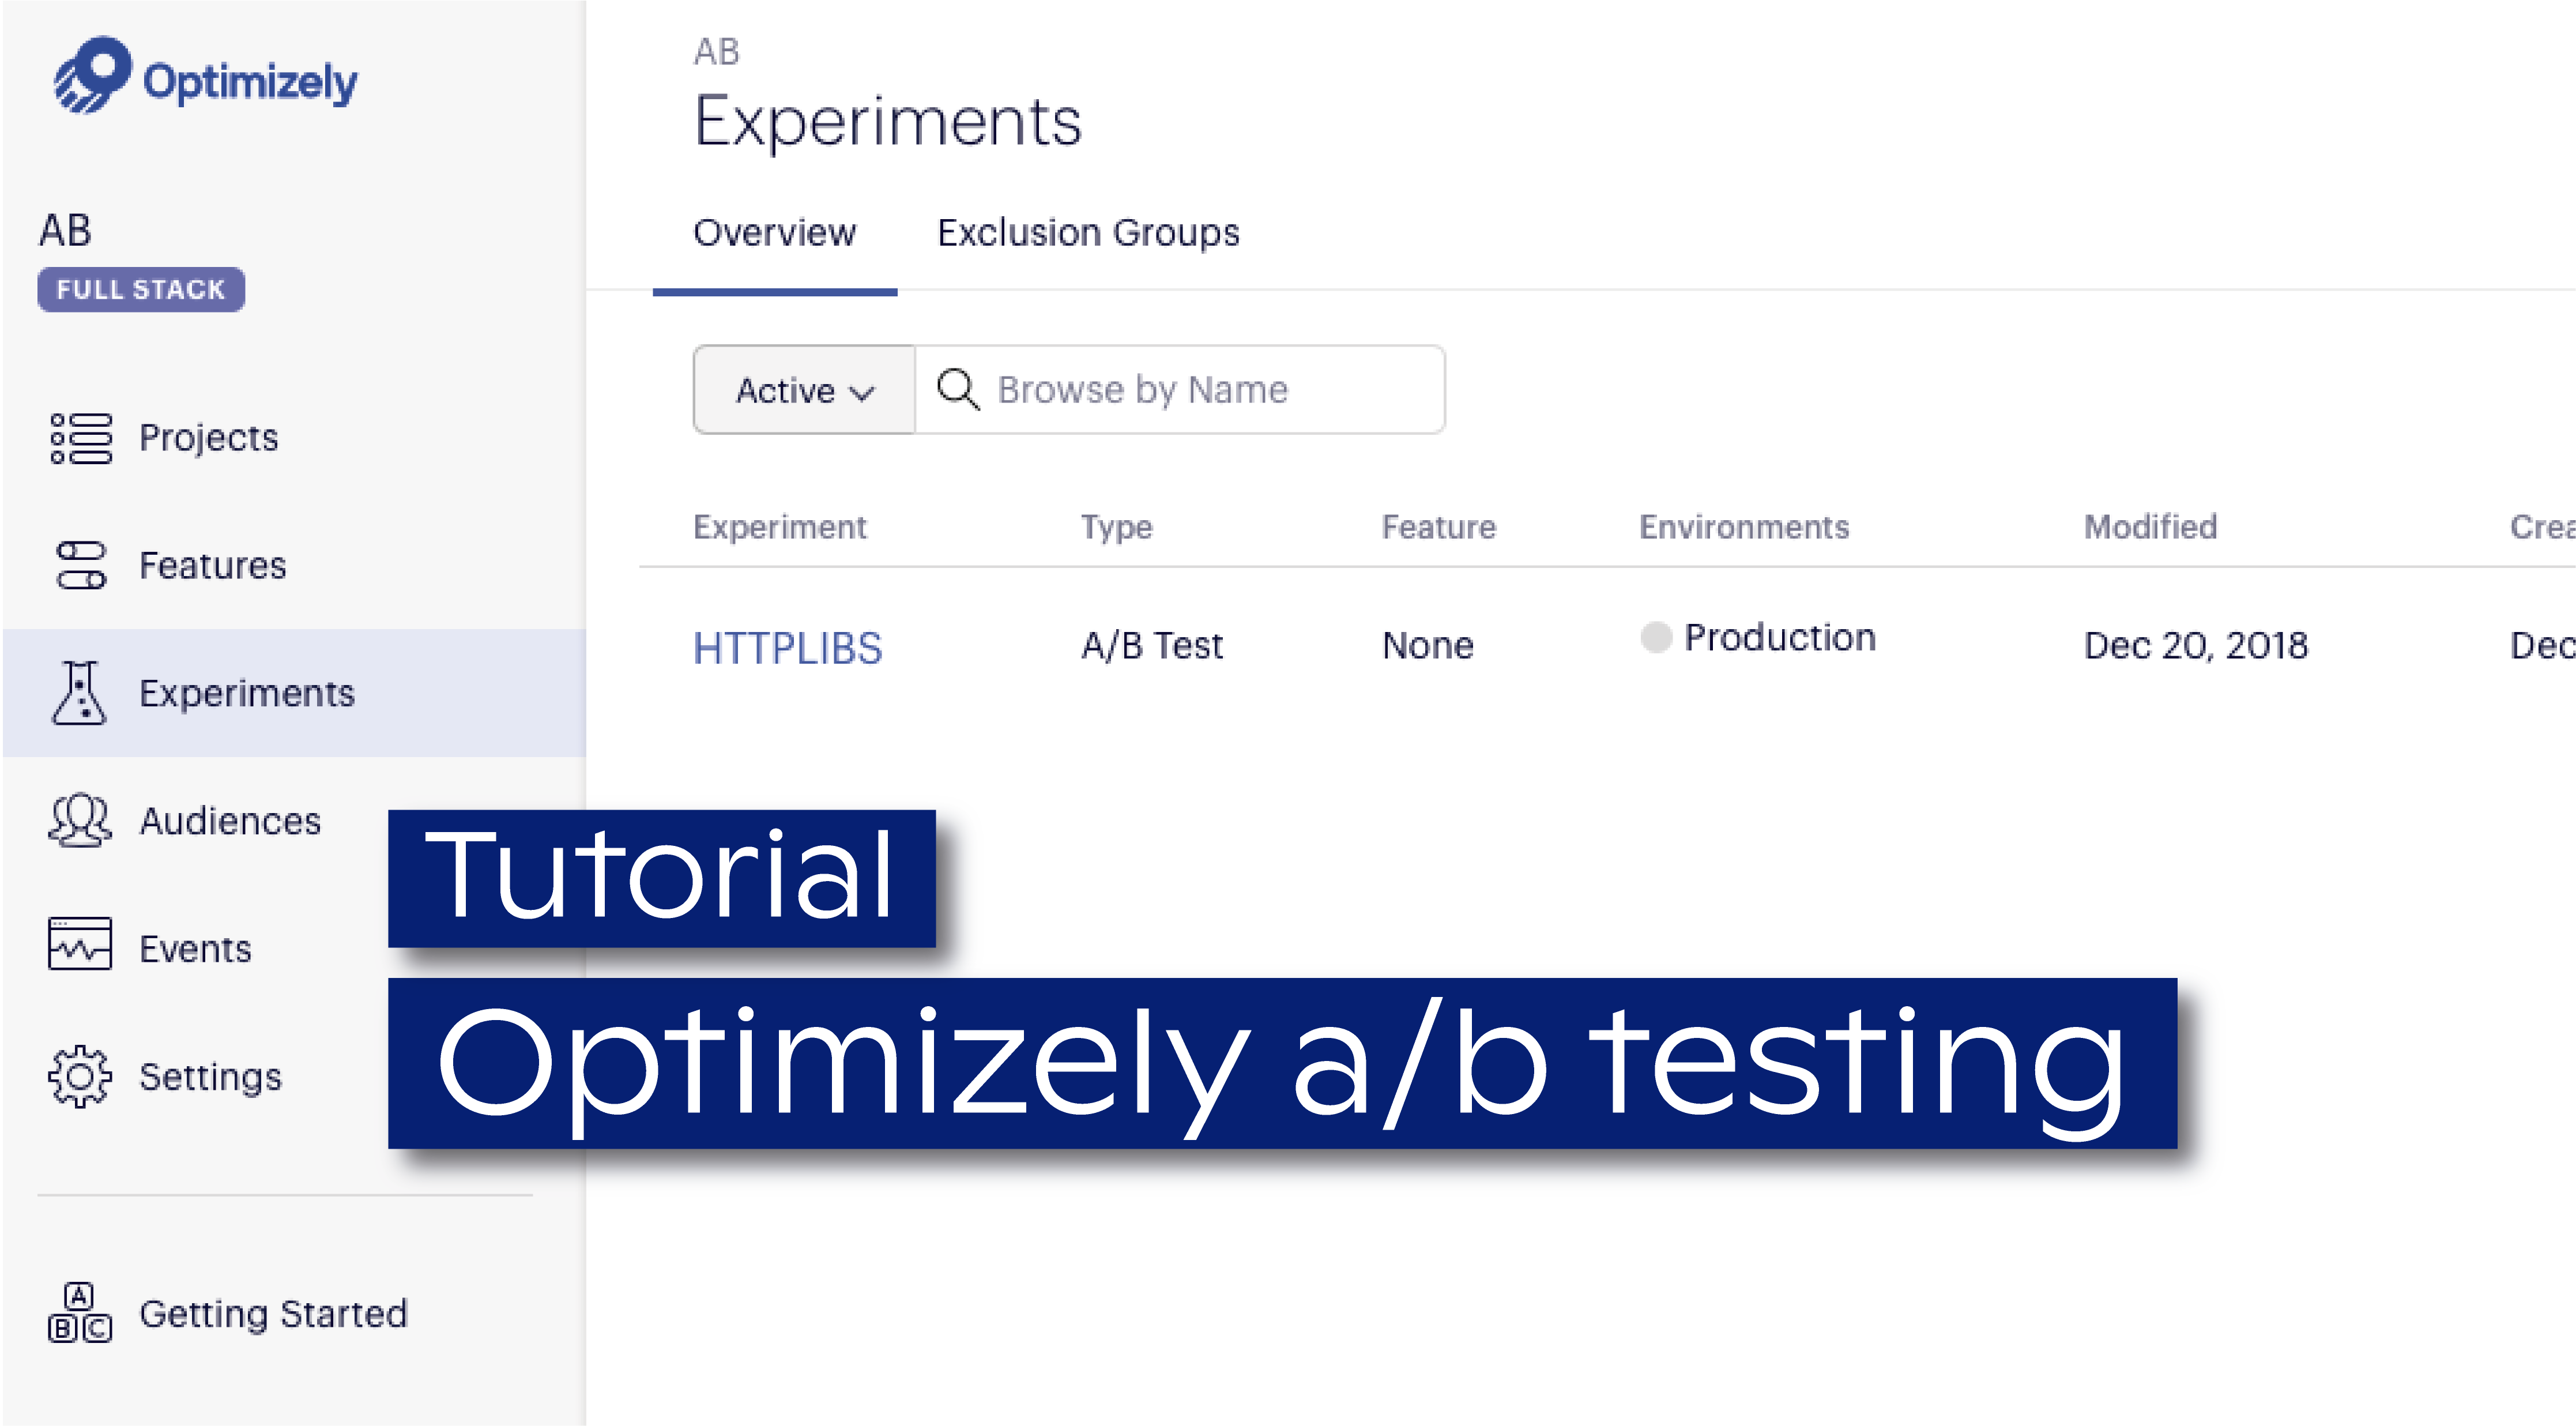 Tutorial: Optimizely ab testing tool